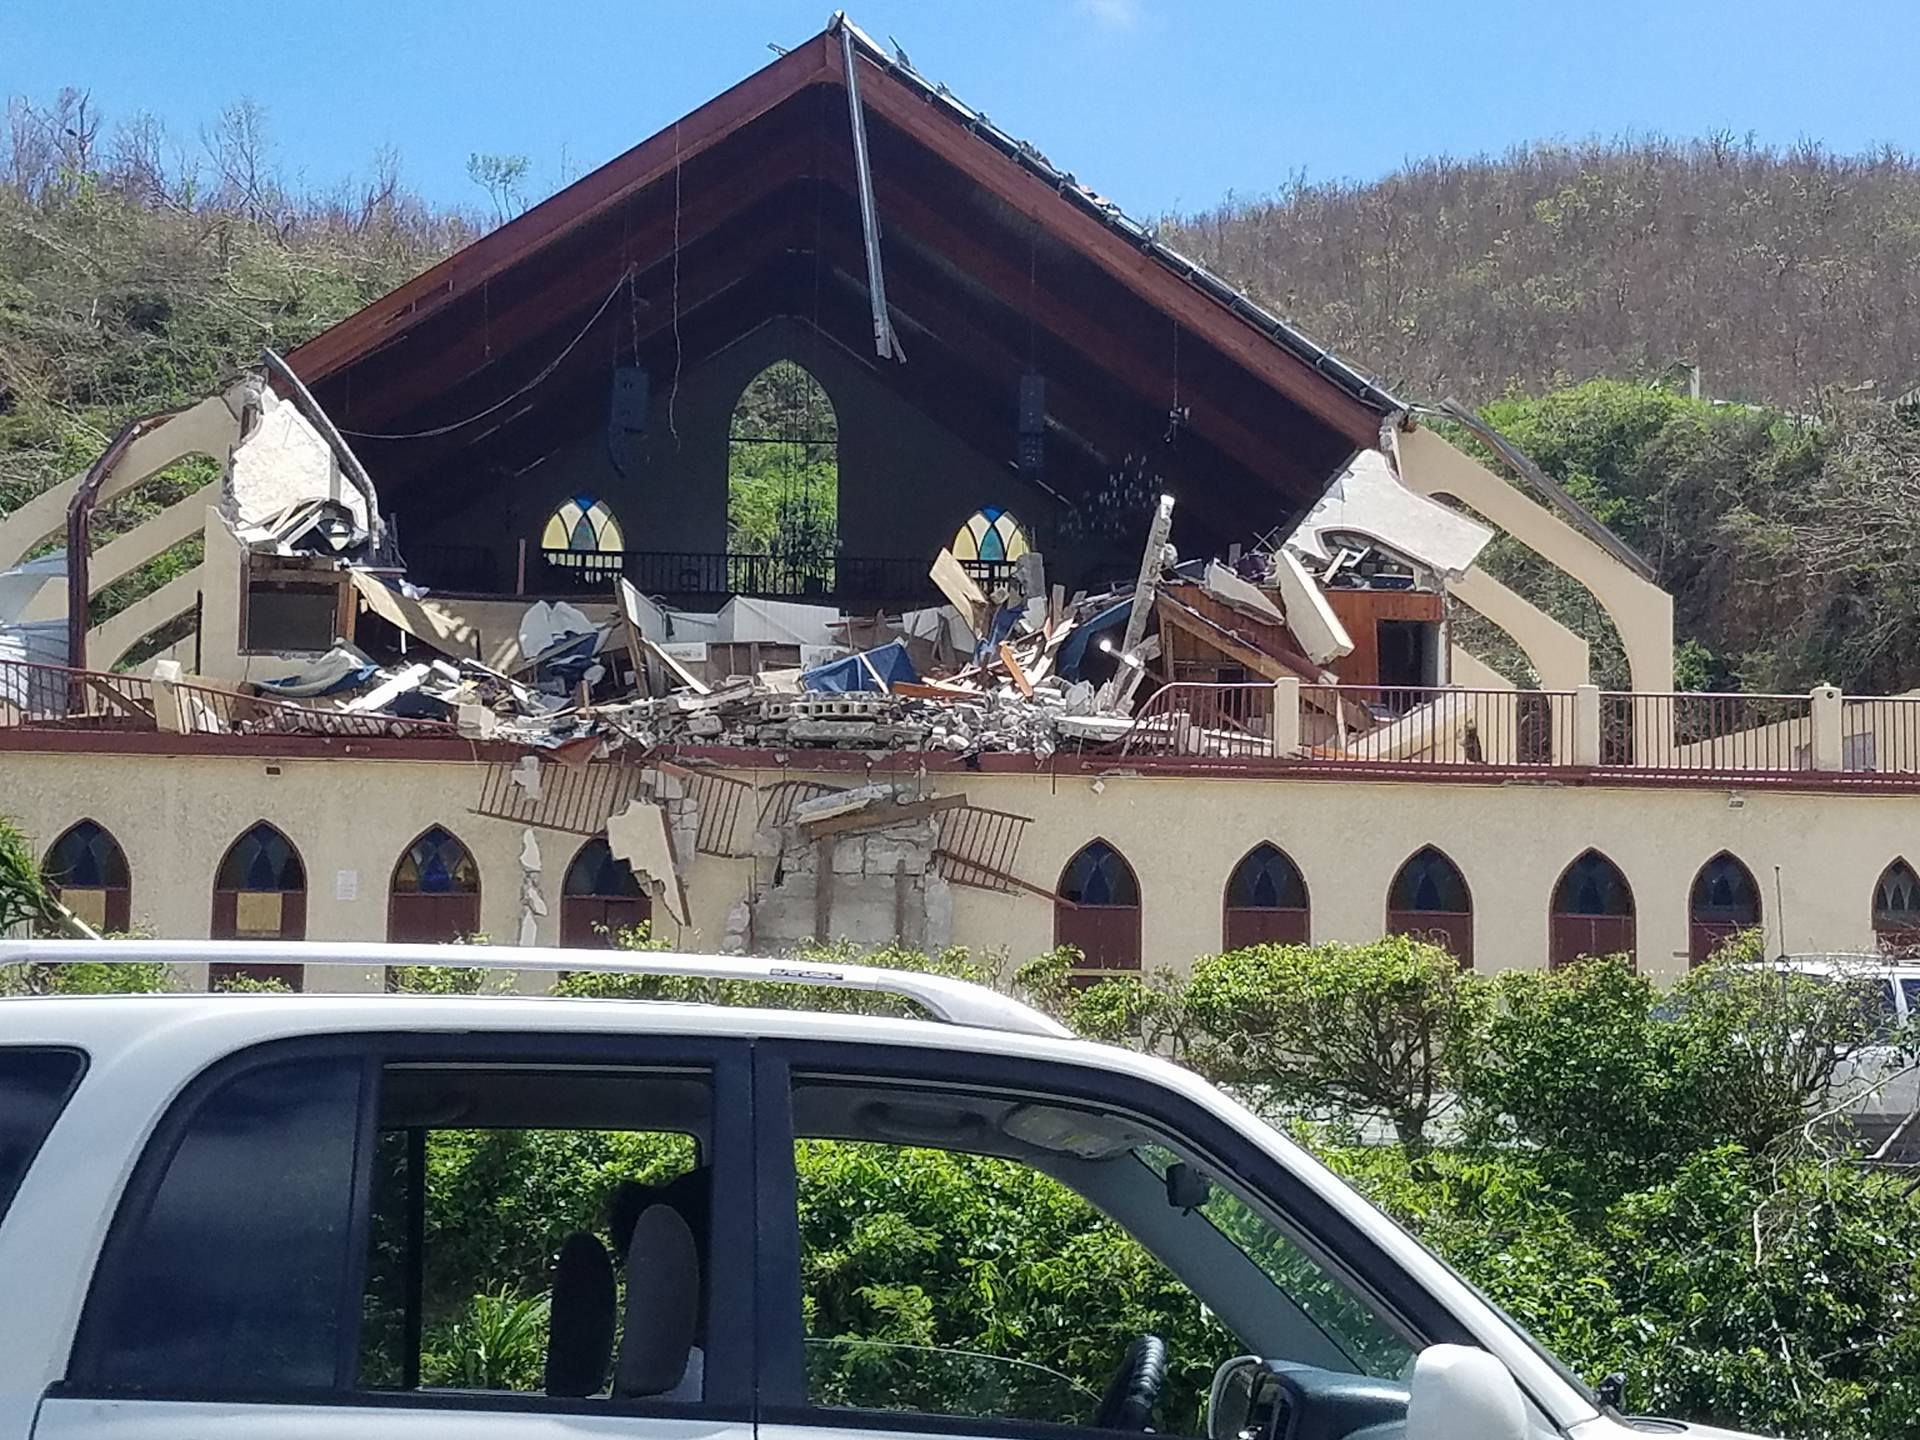 Destroyed facade of church after hurricane in Virgin Islands. Photo taken by Emma Graham-Winkles Oct. 2017.